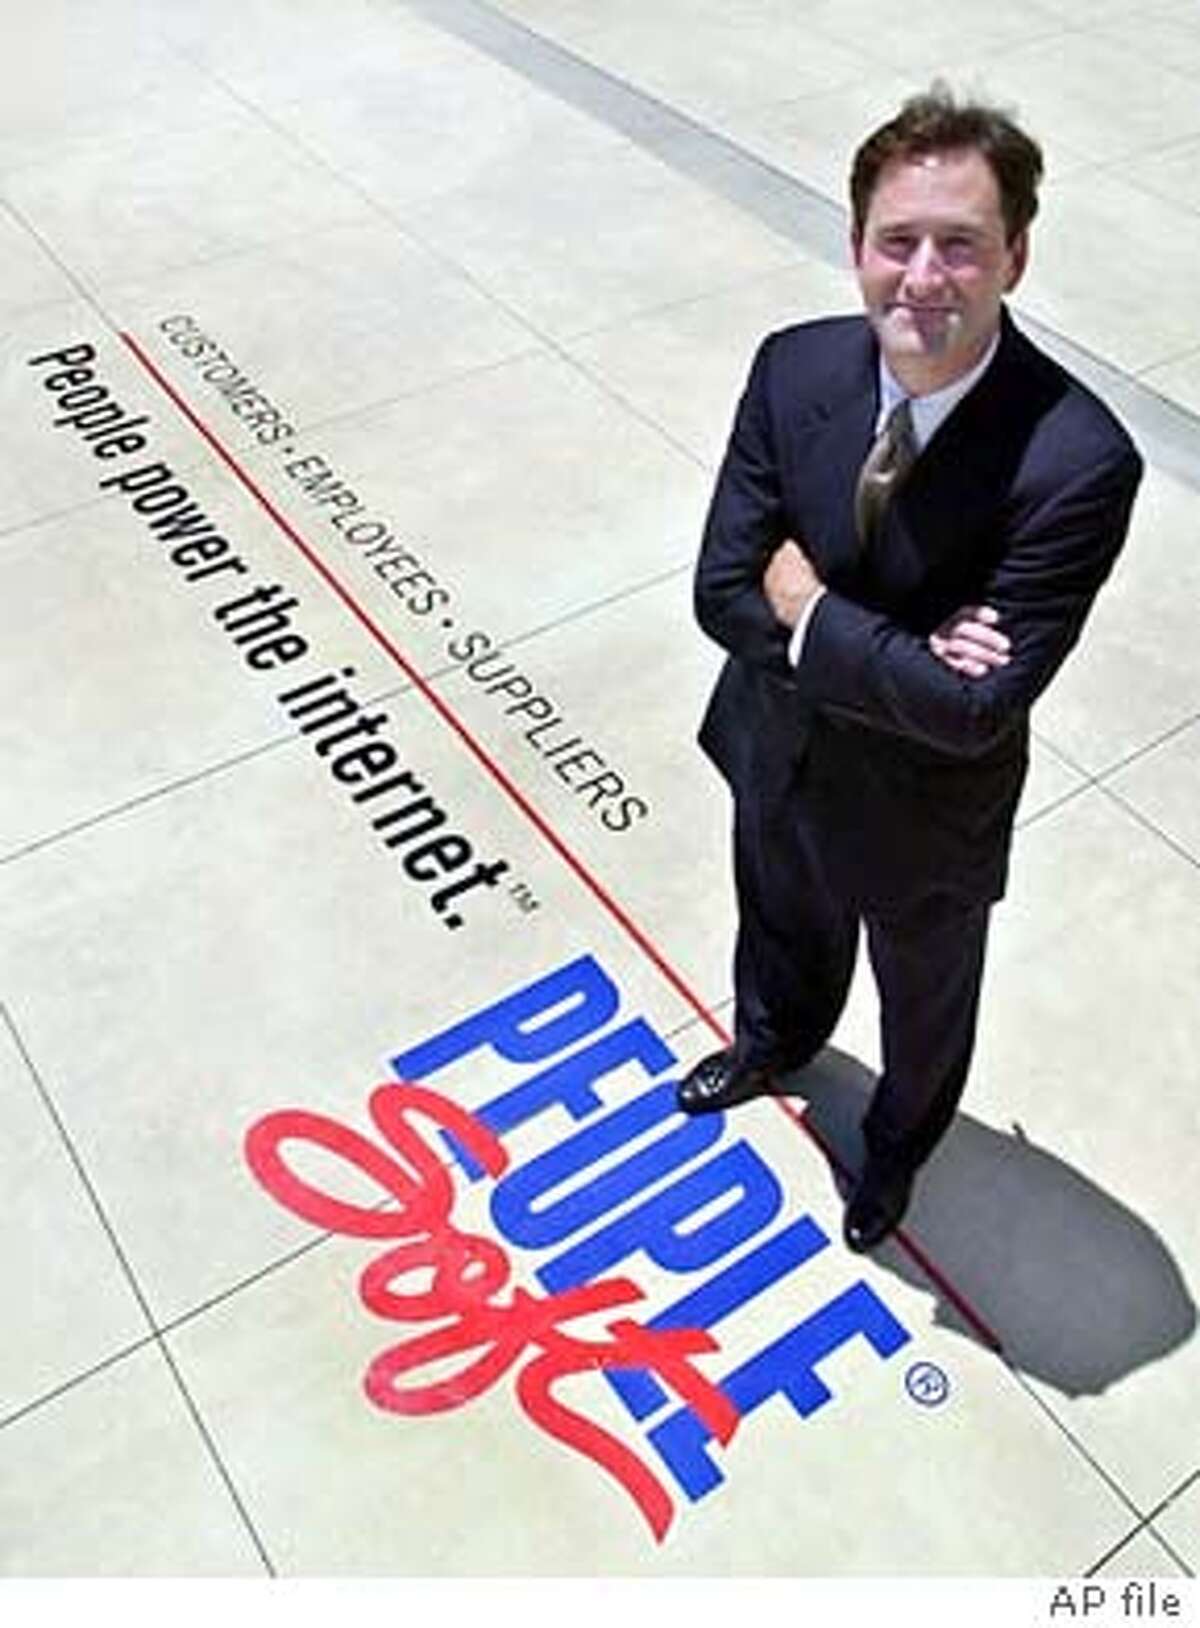 ** FILE ** Craig Conway, CEO of PeopleSoft, stands in front of his company's offices, Wednesday, June 28, 2000, in Pleasanton, Calif. On Friday, June 6, 2003, business software maker Oracle Corp. offered $5.1 billion to buy rival PeopleSoft Corp. in a hostile takeover attempt aimed at eliminating one of its fiercest competitors. The all-cash bid translates into $16 per share, just 6 percent above PeopleSoft's closing price of $15.11 before Oracle disclosed its plans. (AP Photo/Ben Margot) ALSO RAN 7/15/03 Craig Conway, PeopleSoft CEO and president. CAT